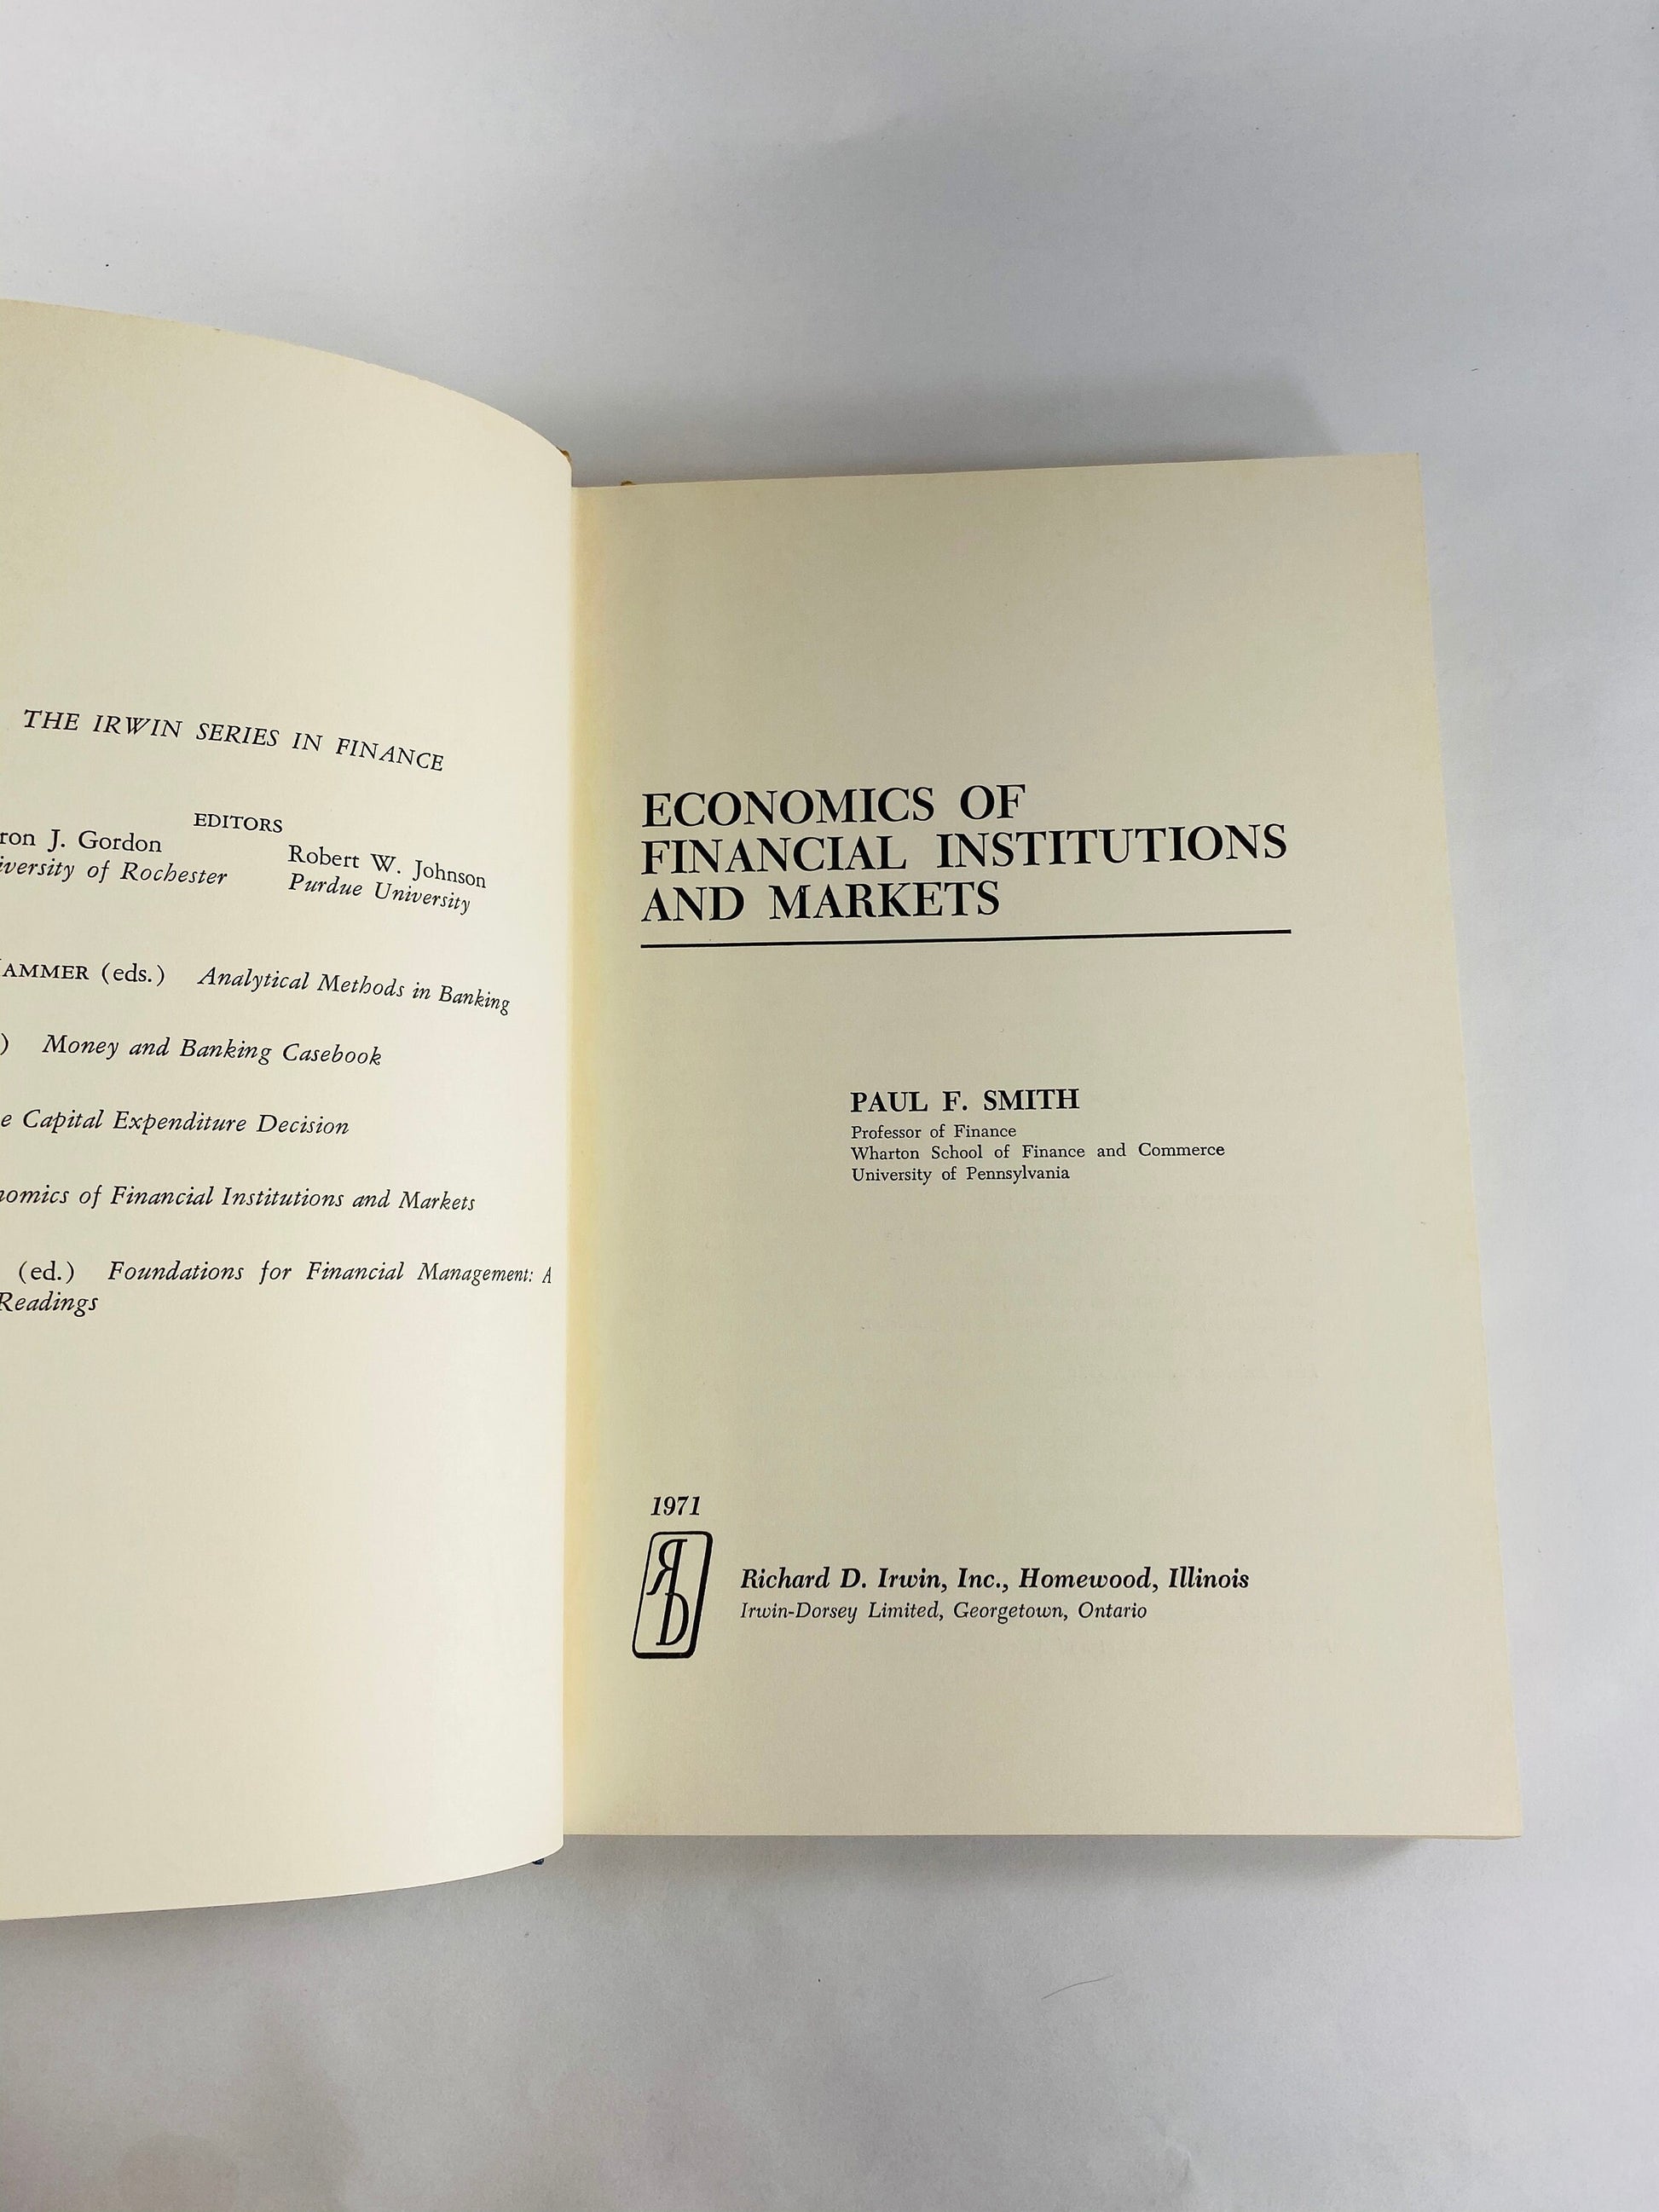 Economics of Financial Institutions and Markets FIRST EDITION vintage textbook by Paul Smith circa 1971. Blue home office decor